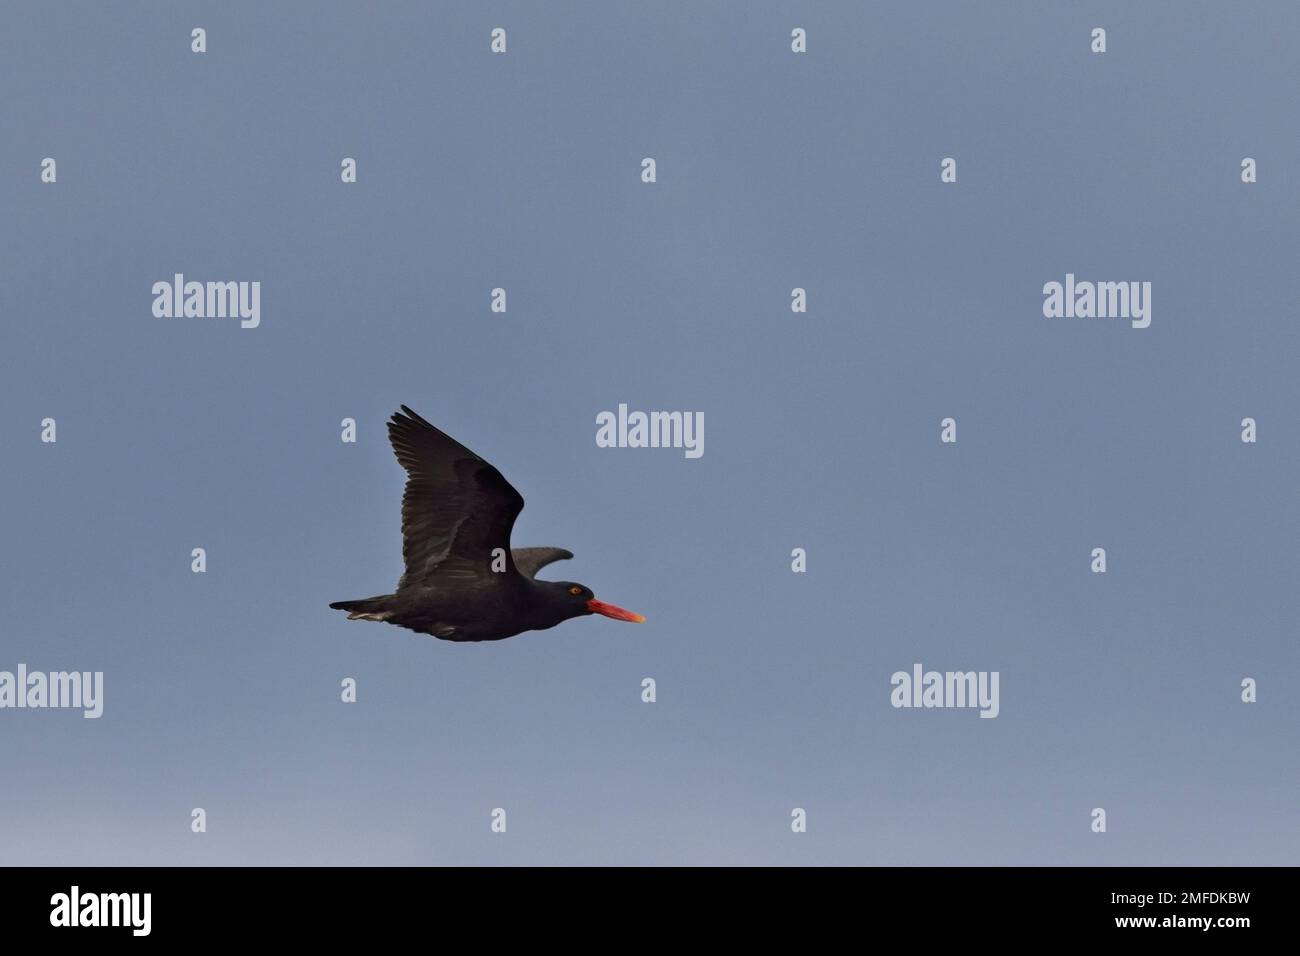 Blackish Oystercatcher (Haematopus ater), adult in flight, Tierra del Fuego, Patagonia, Argentina. Stock Photo